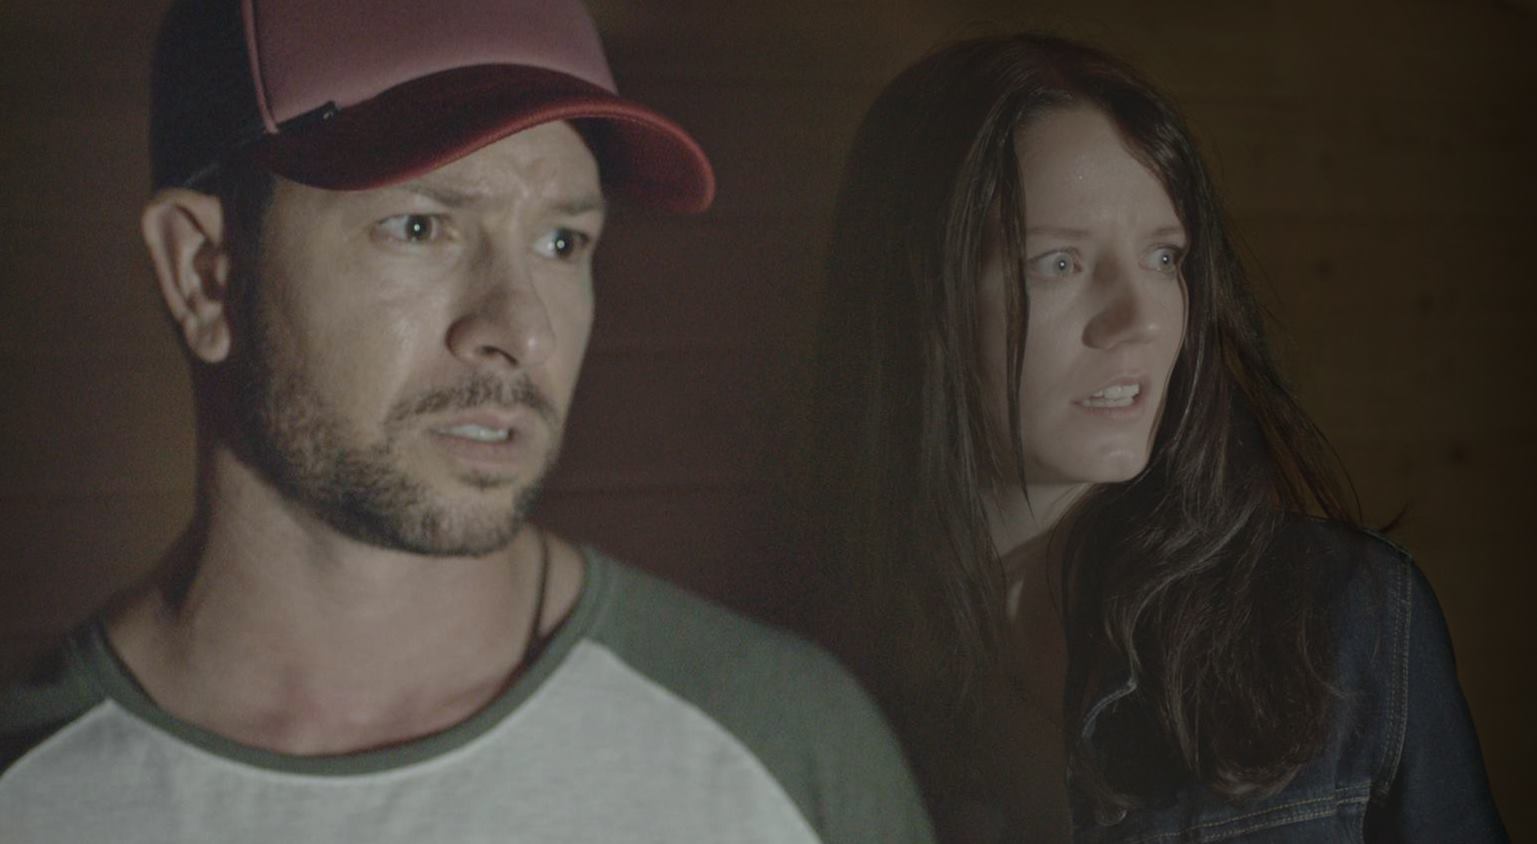 Still of Mhairi Calvey as 'Crystal' and Franco Flammia as 'Mal' in Ilyas Kaduji's 'Abduct' (2014)